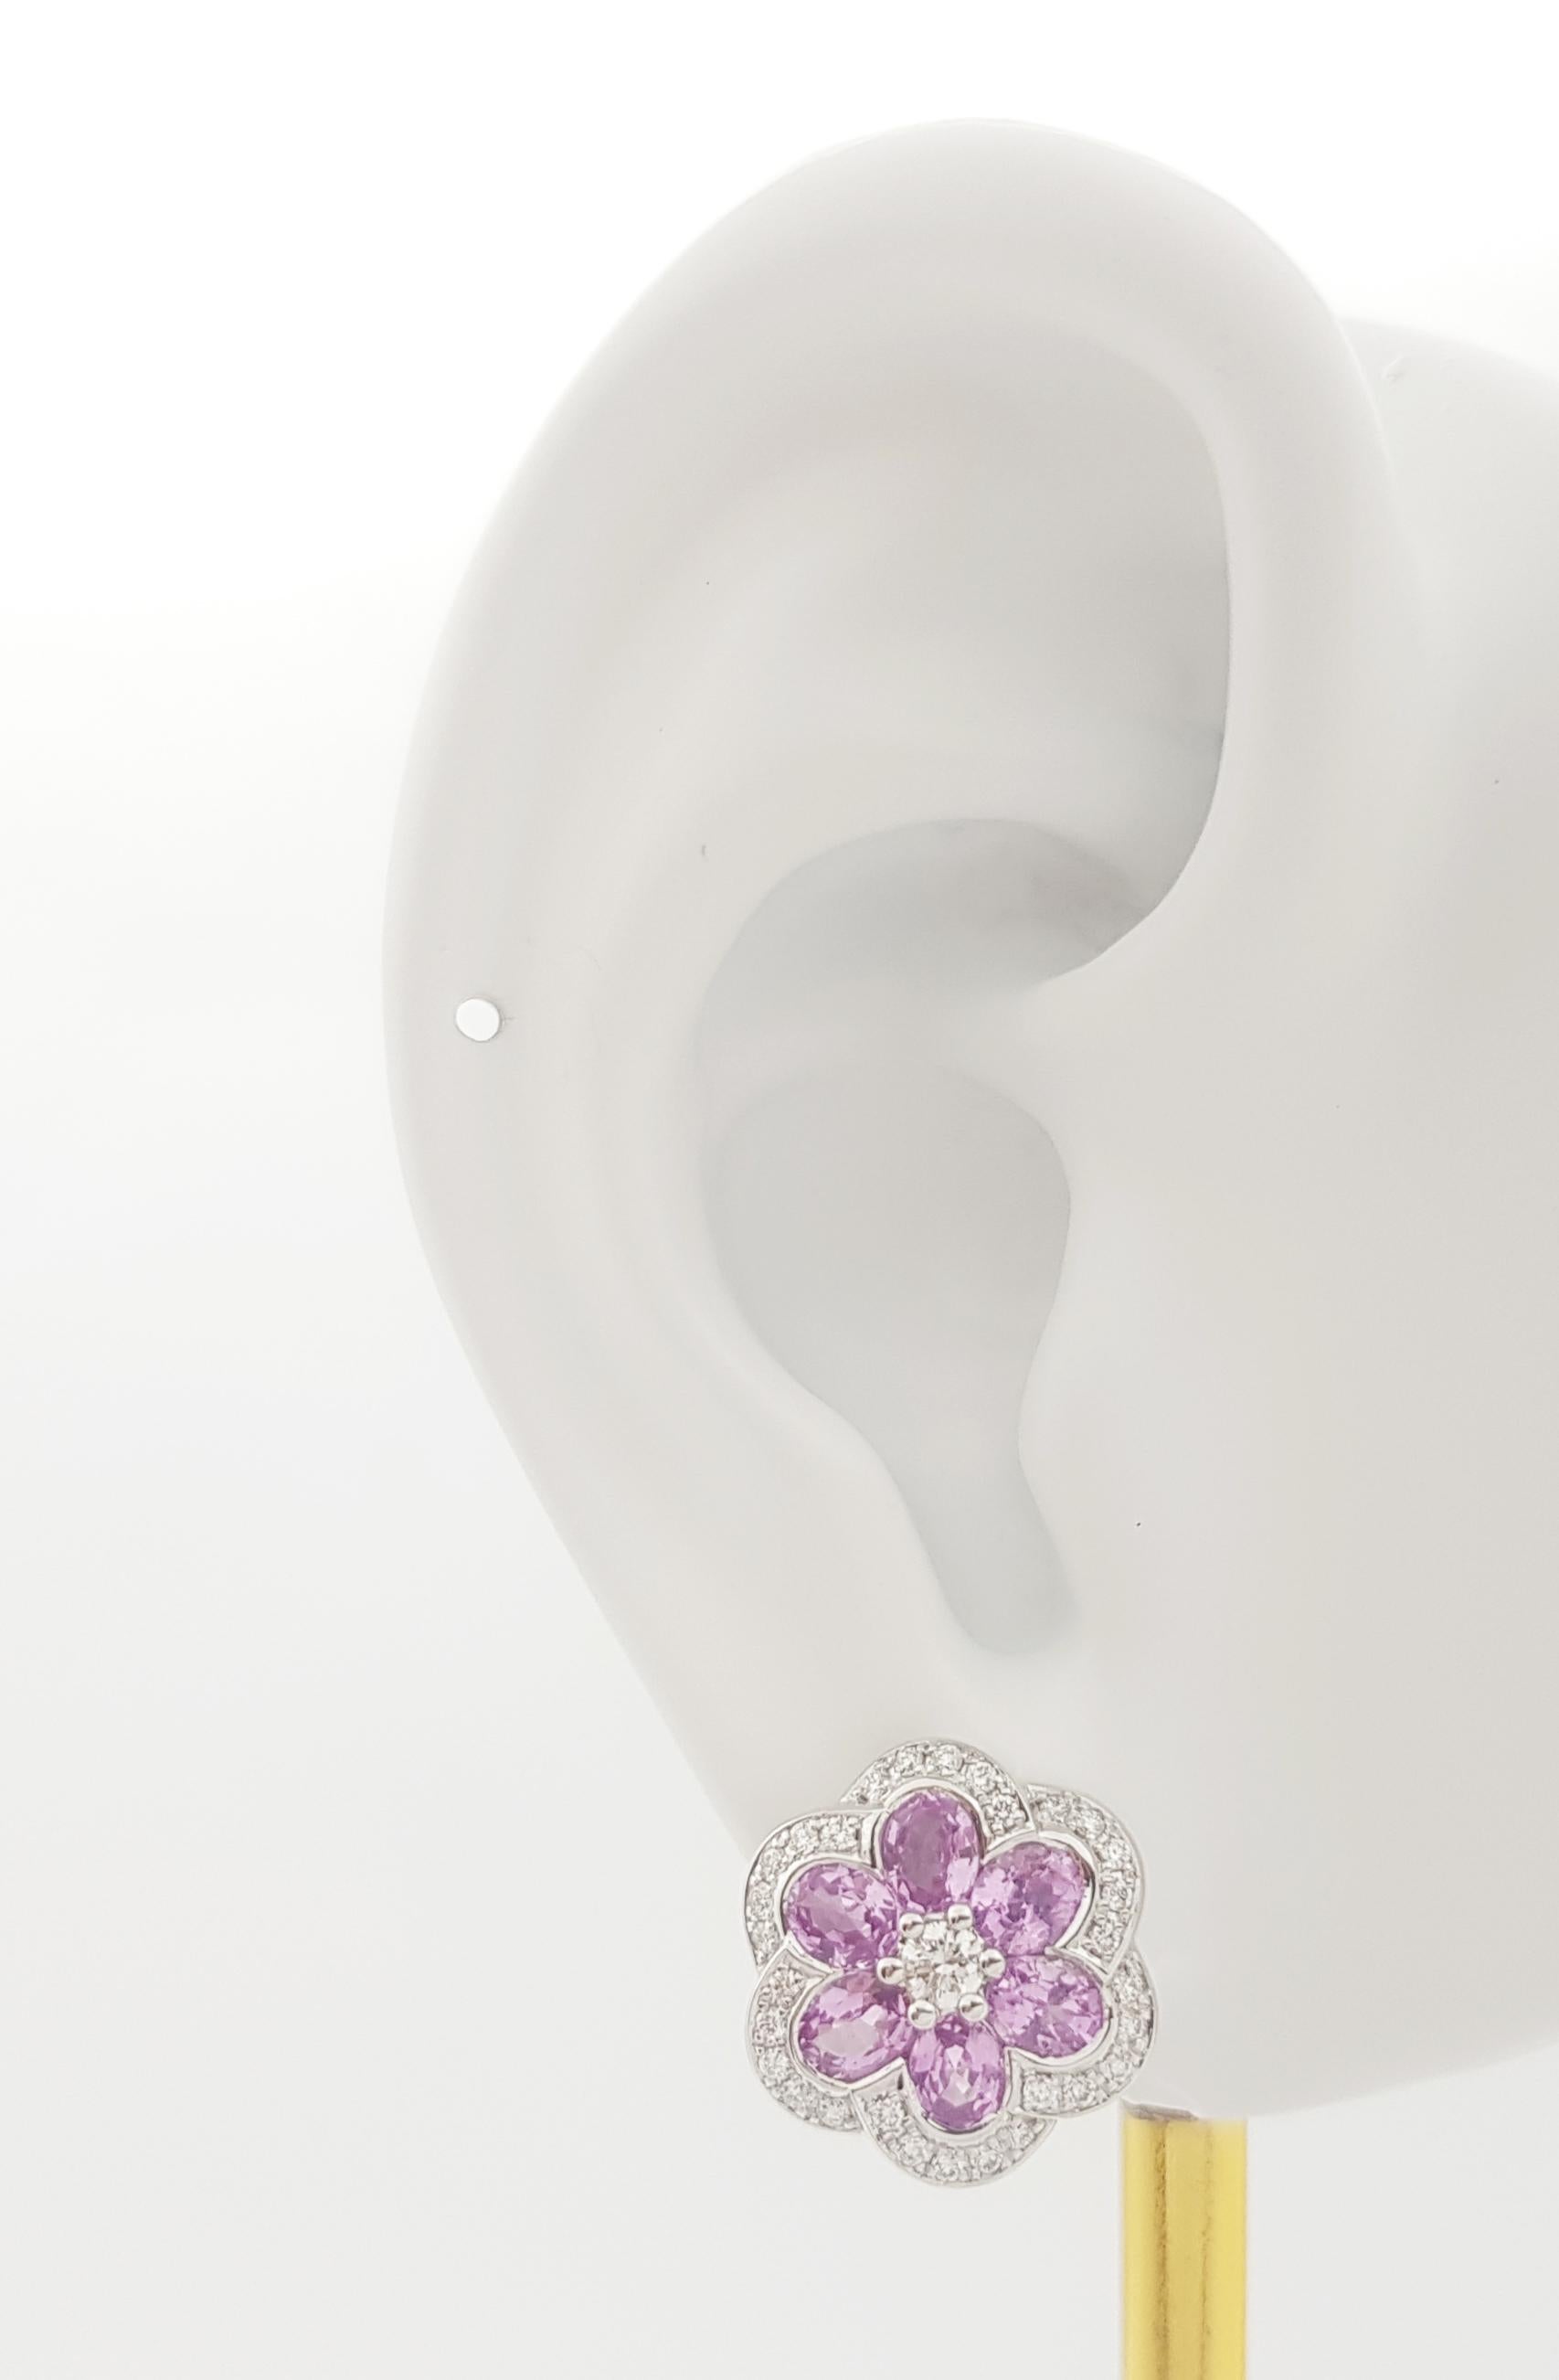 Pink Sapphire 2.55 carats with Diamond 0.42 carats Earrings set in 18 Karat White Gold Settings

Width: 1.4 cm 
Length: 1.4 cm
Total Weight: 8.25 grams

